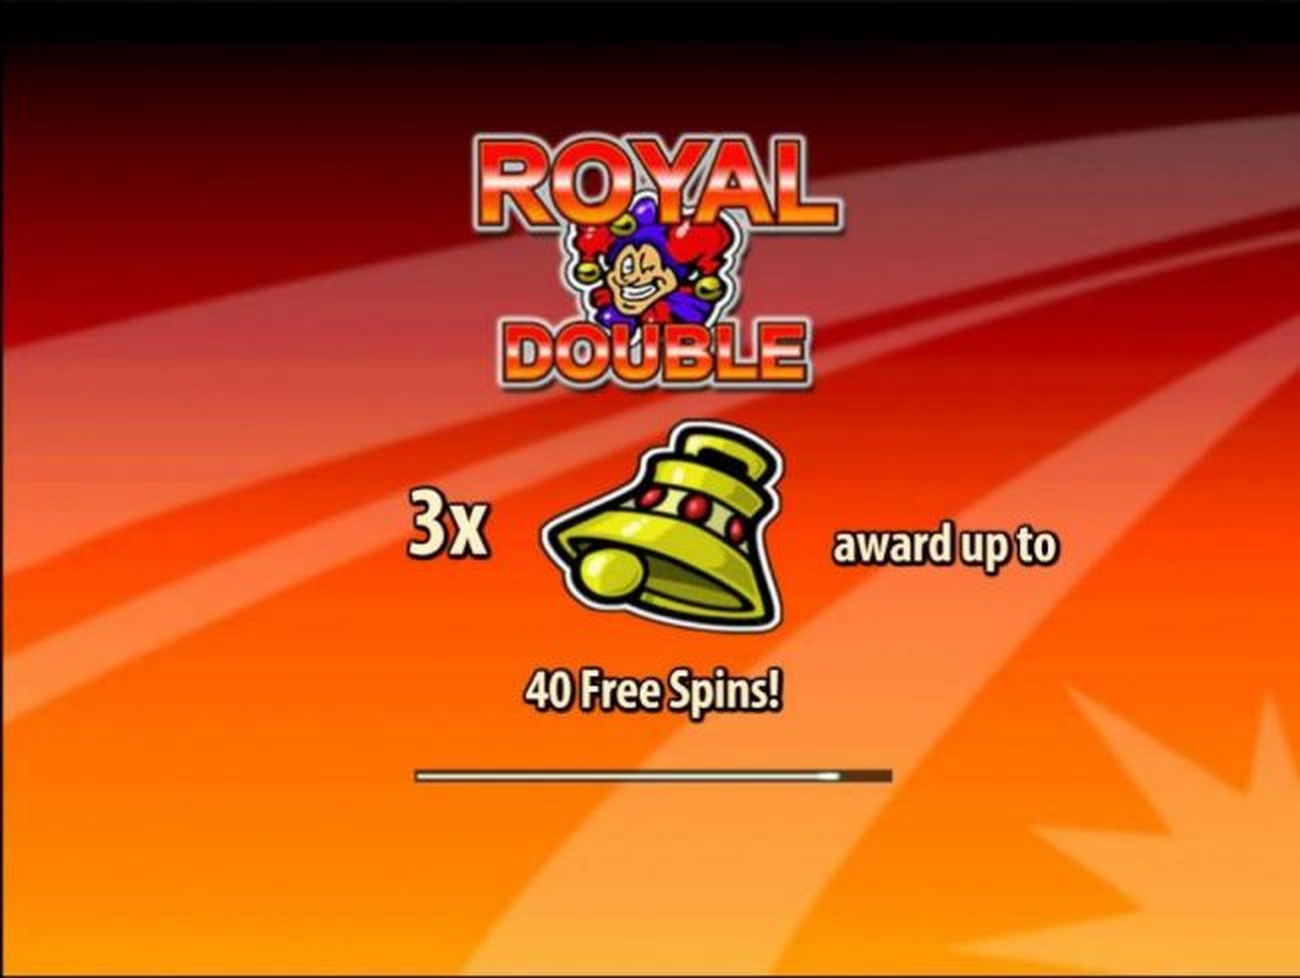 The Royal Double Online Slot Demo Game by Tom Horn Gaming